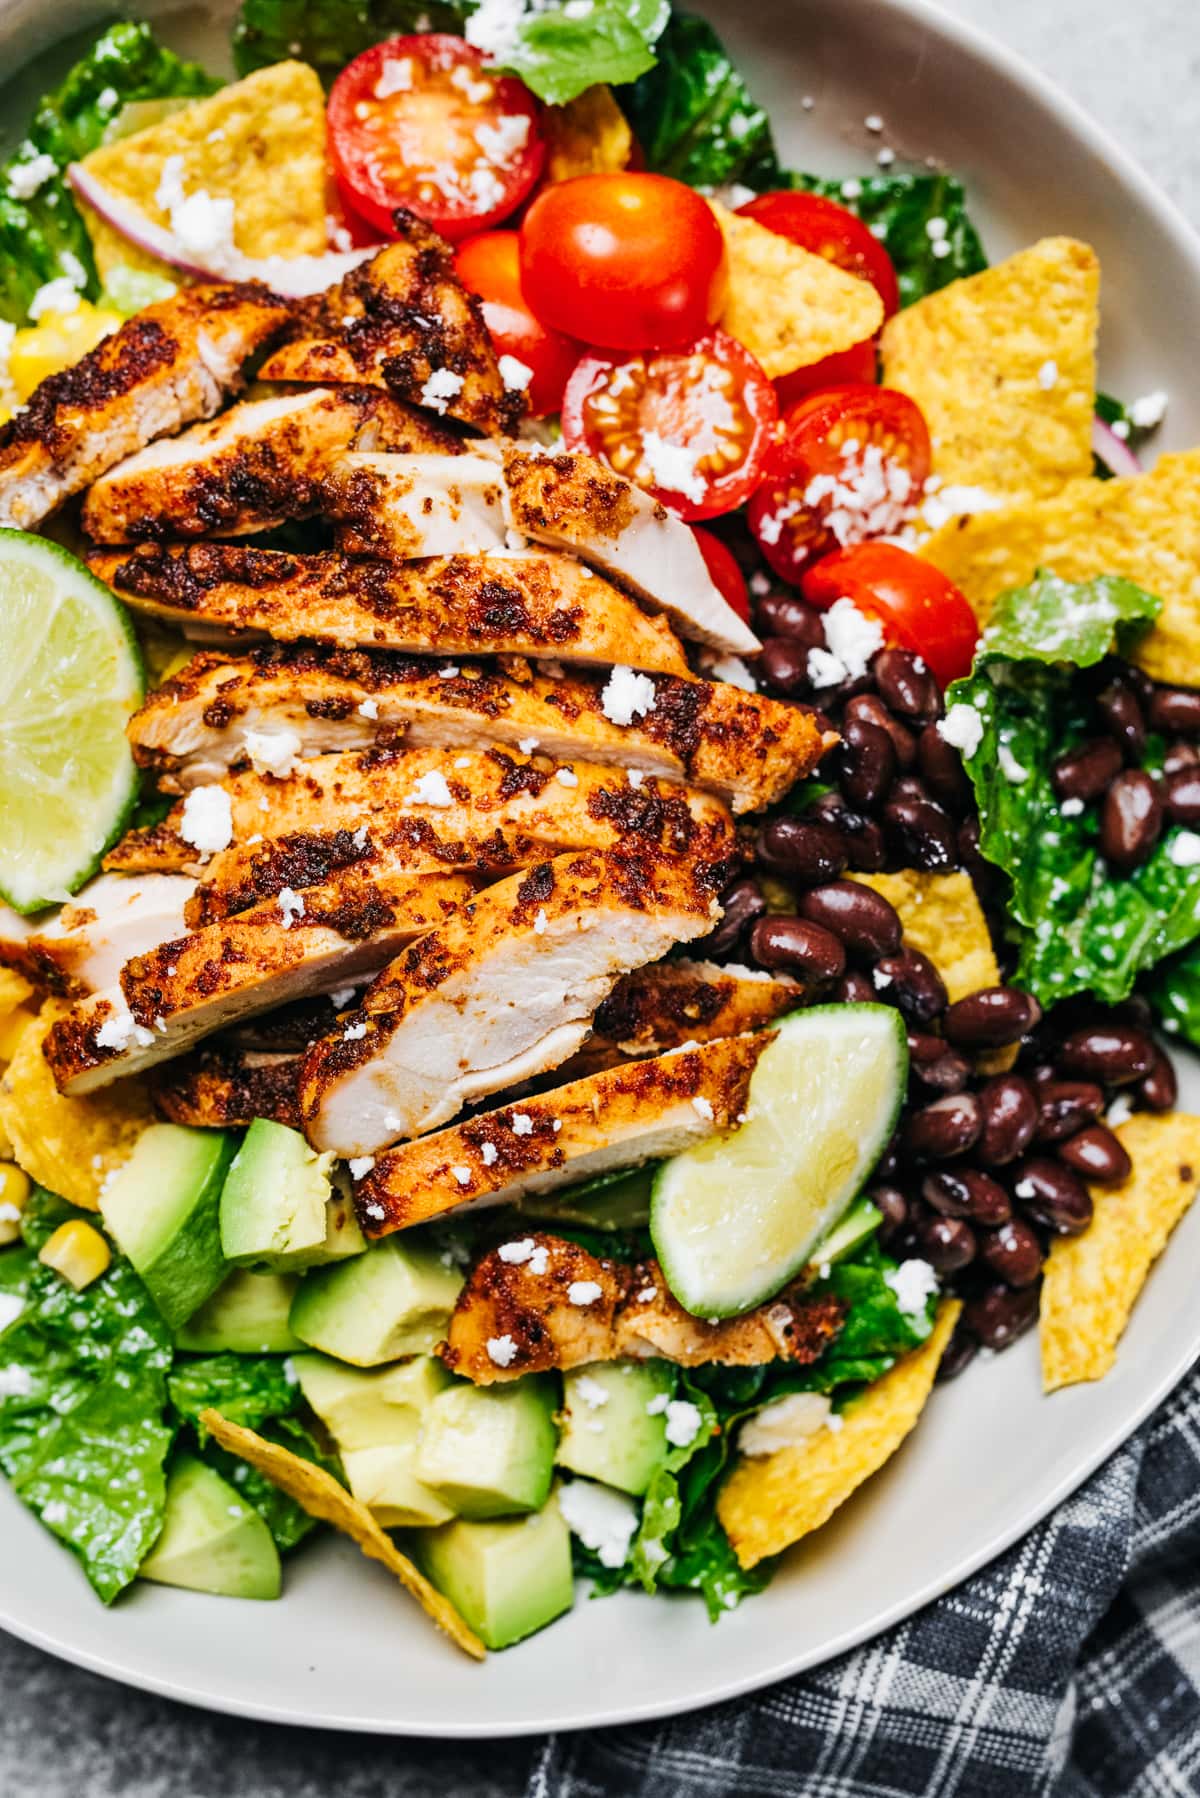 Close-up image of sliced grilled chicken arranged on over lettuce greens, tomatoes, black beans, and nacho chips.